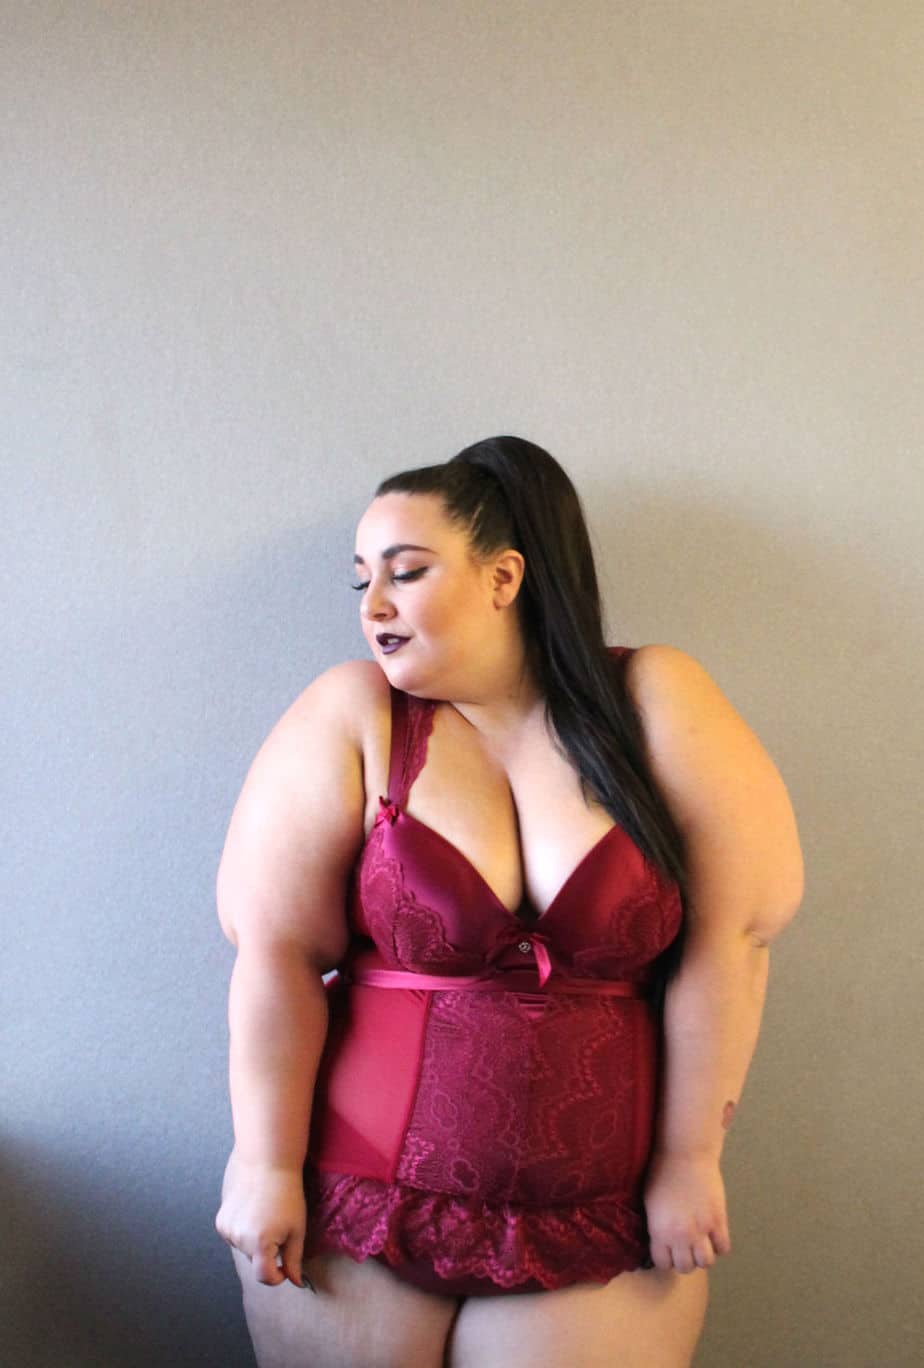 Six Retailers to Shop For Plus Size Lingerie This Valentine's Day